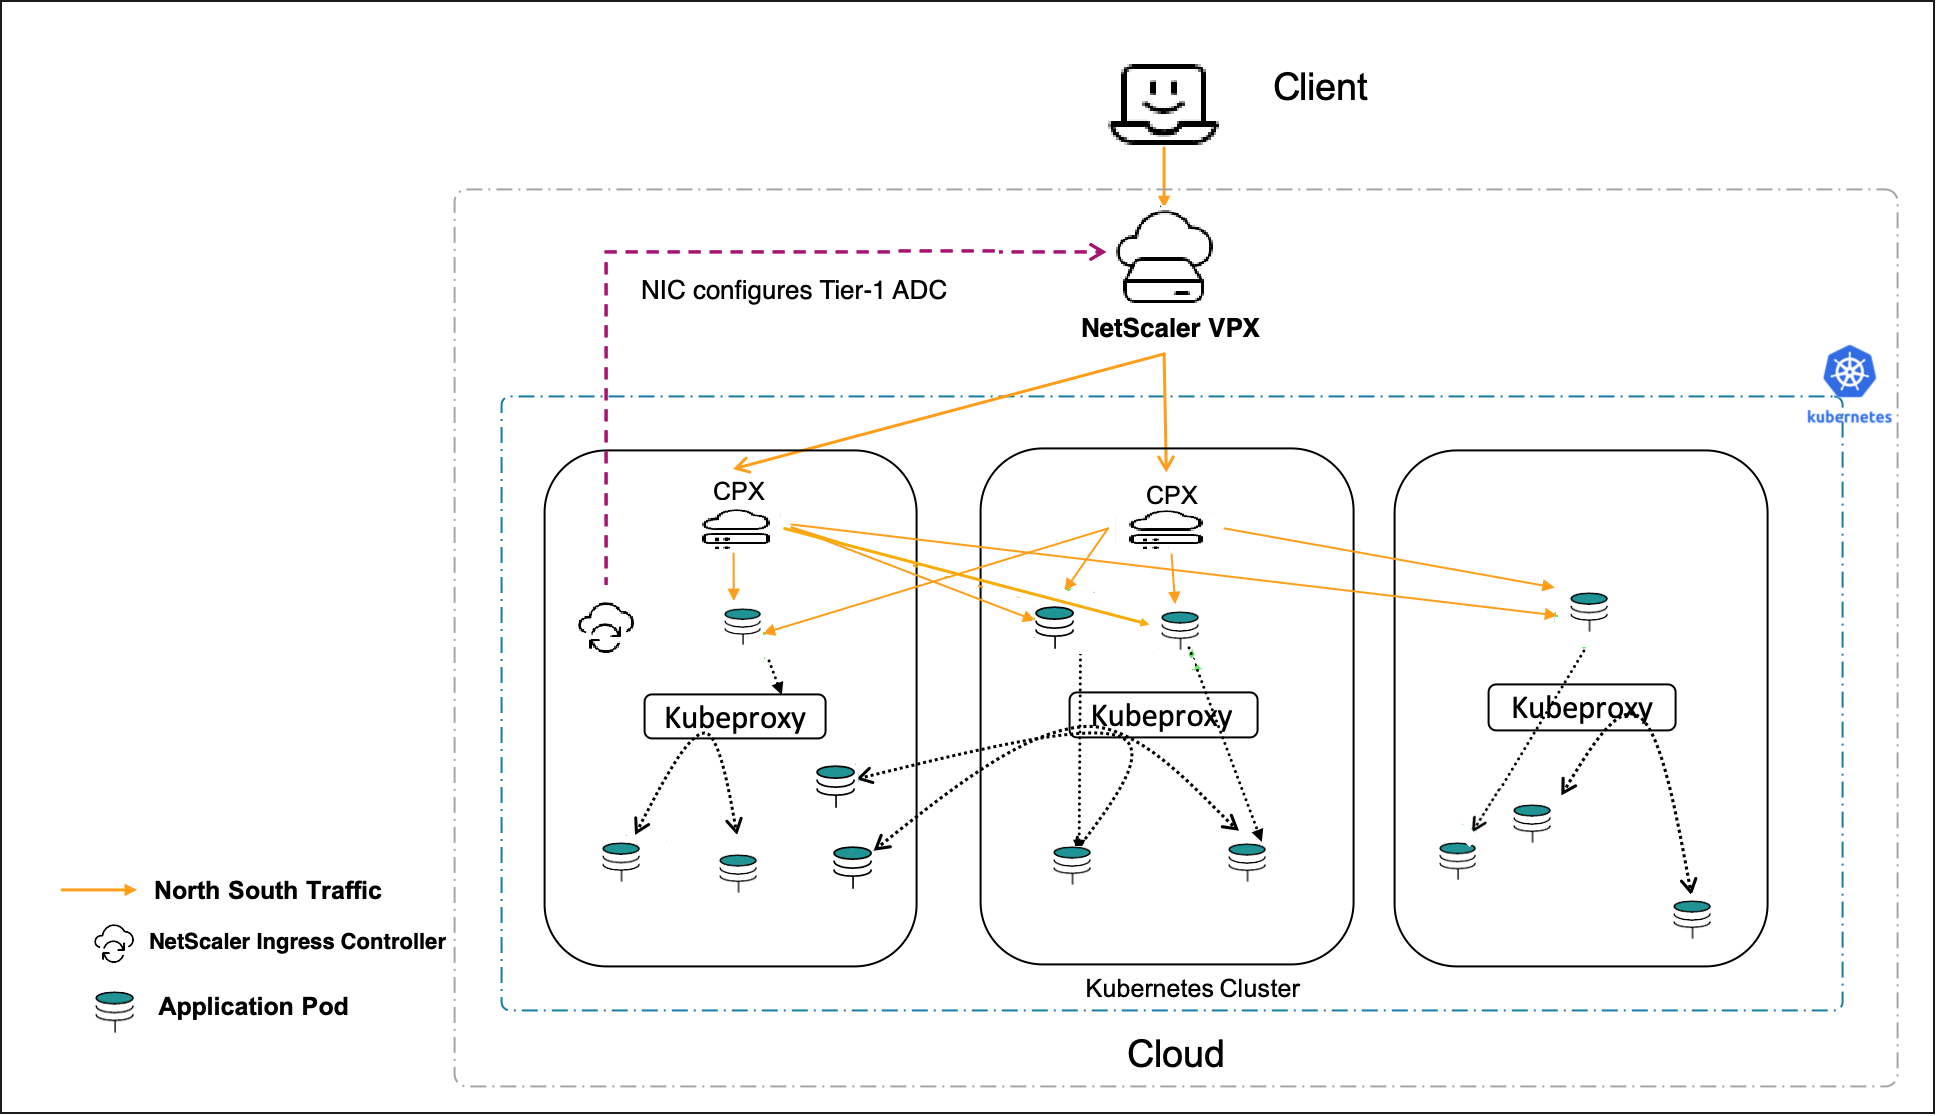 Cloud deployment with VPX in tier-1